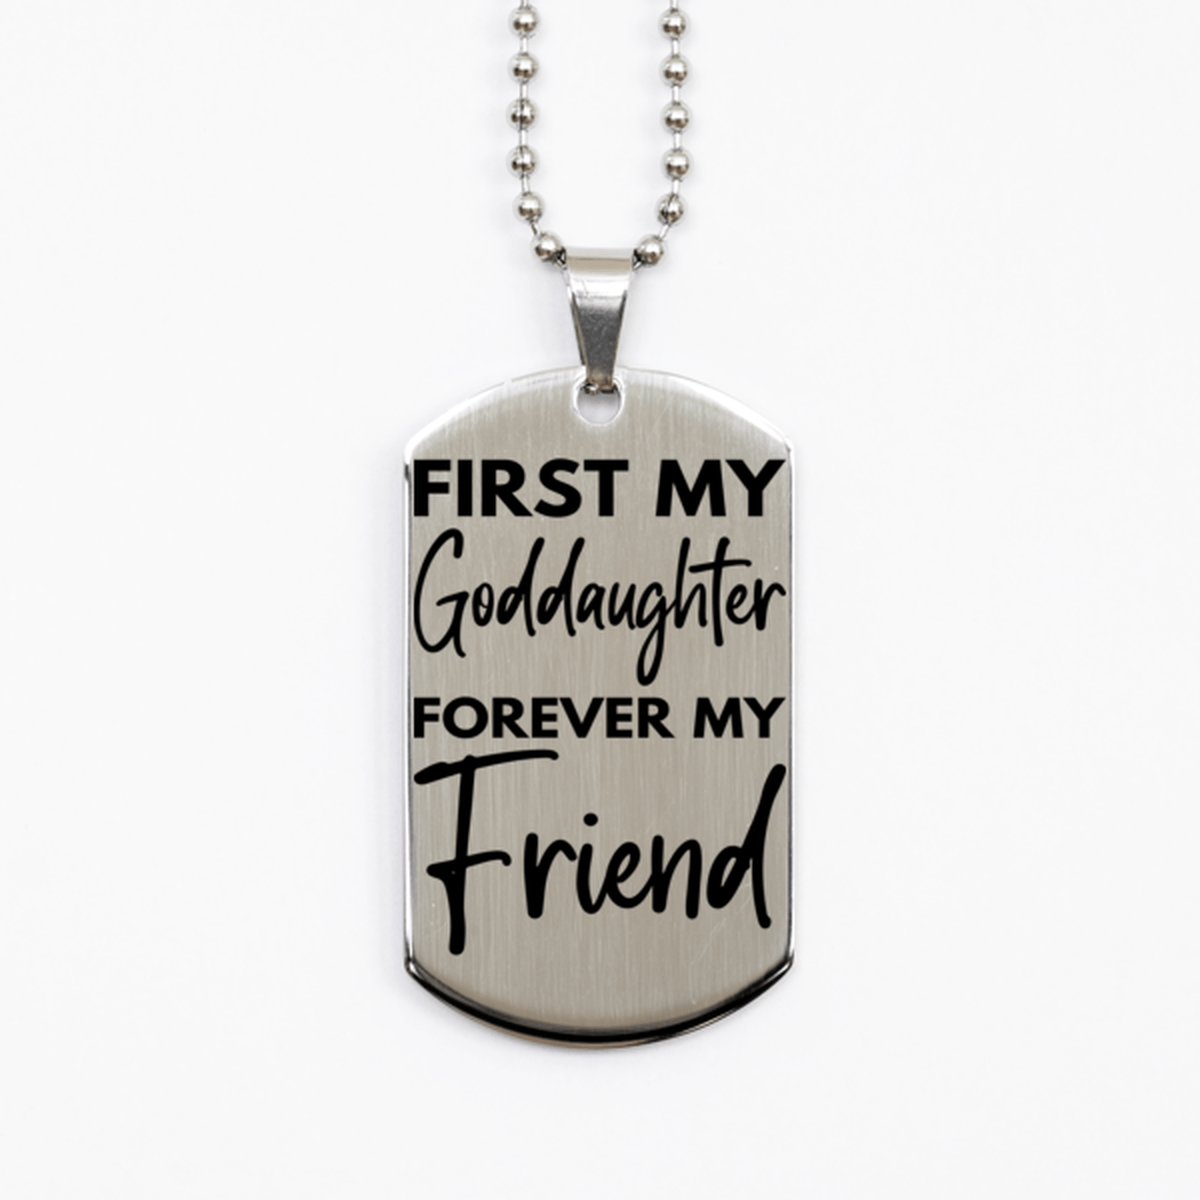 Inspirational Goddaughter Silver Dog Tag Necklace, First My Goddaughter Forever My Friend, Best Birthday Gifts for Goddaughter